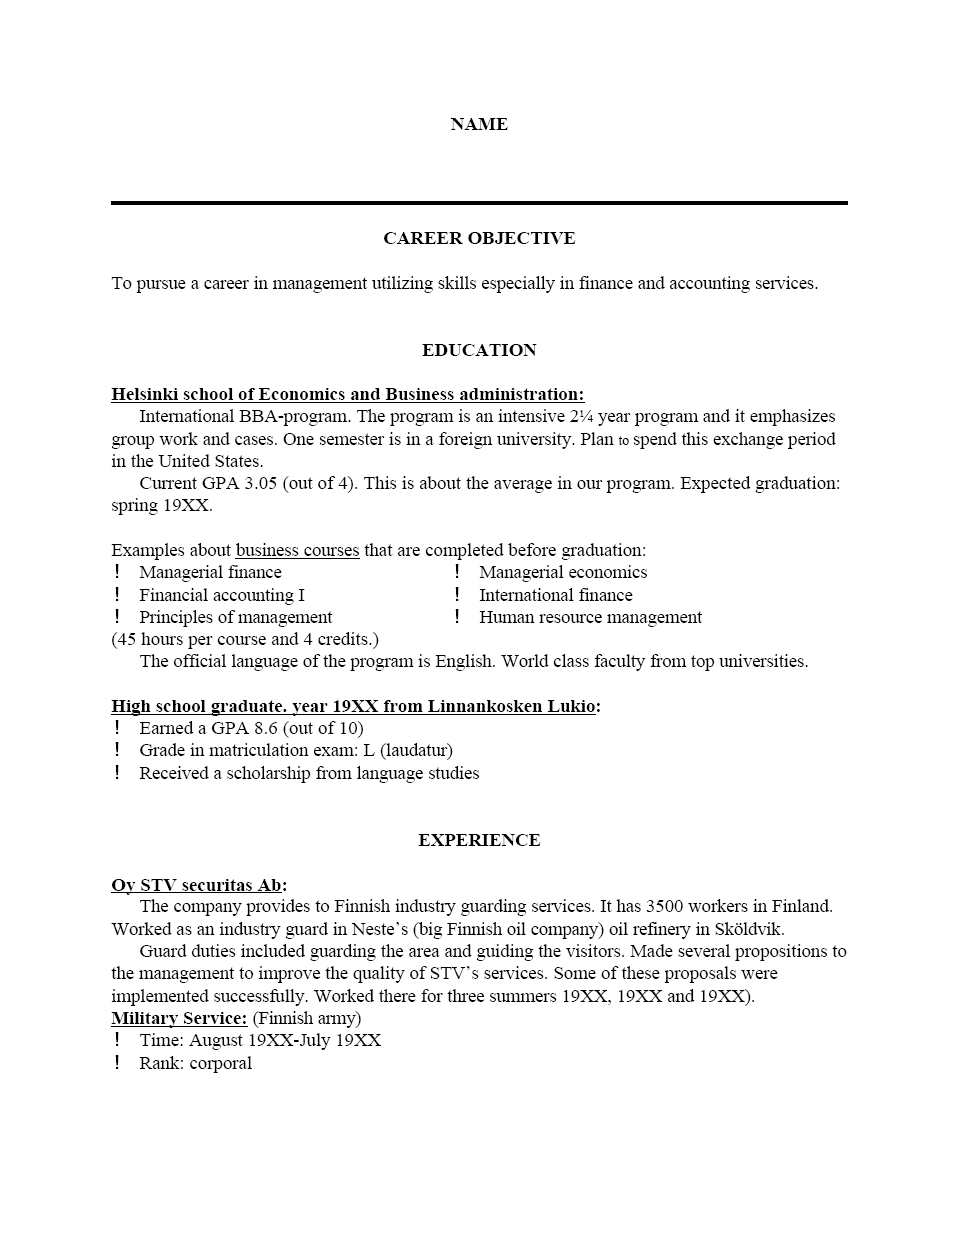 Resume Examples And Templates 